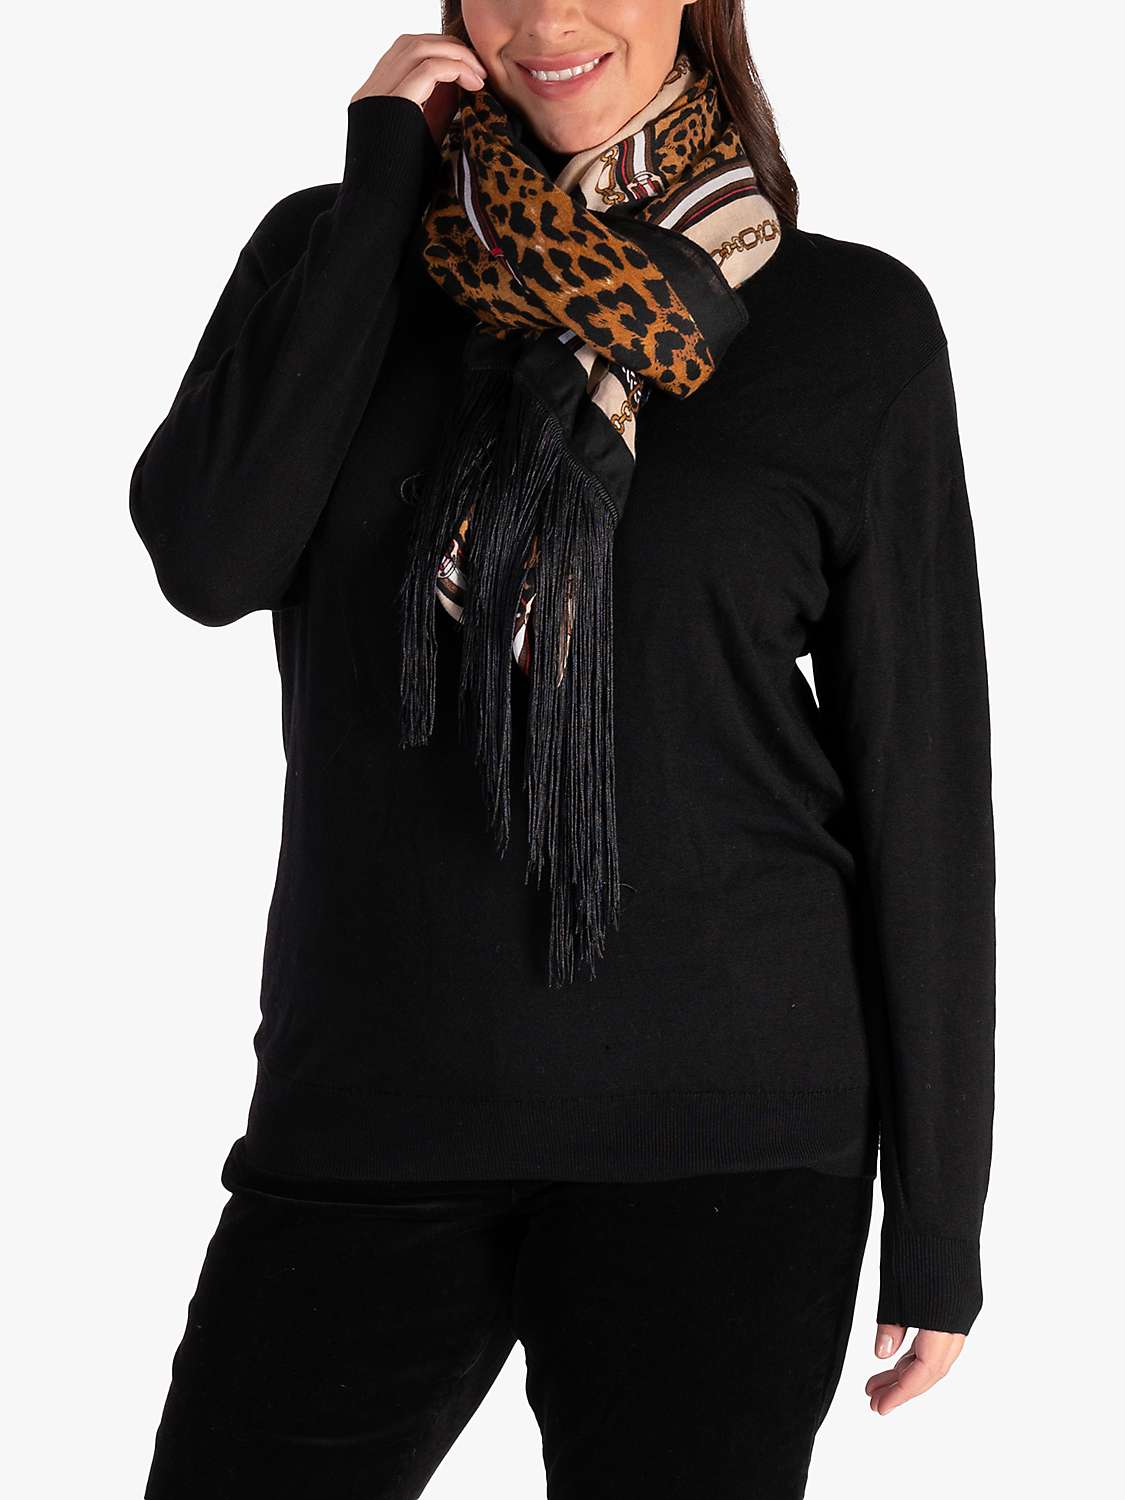 Buy chesca Chain and Leopard Print Fringed Scarf, Black/Camel Online at johnlewis.com